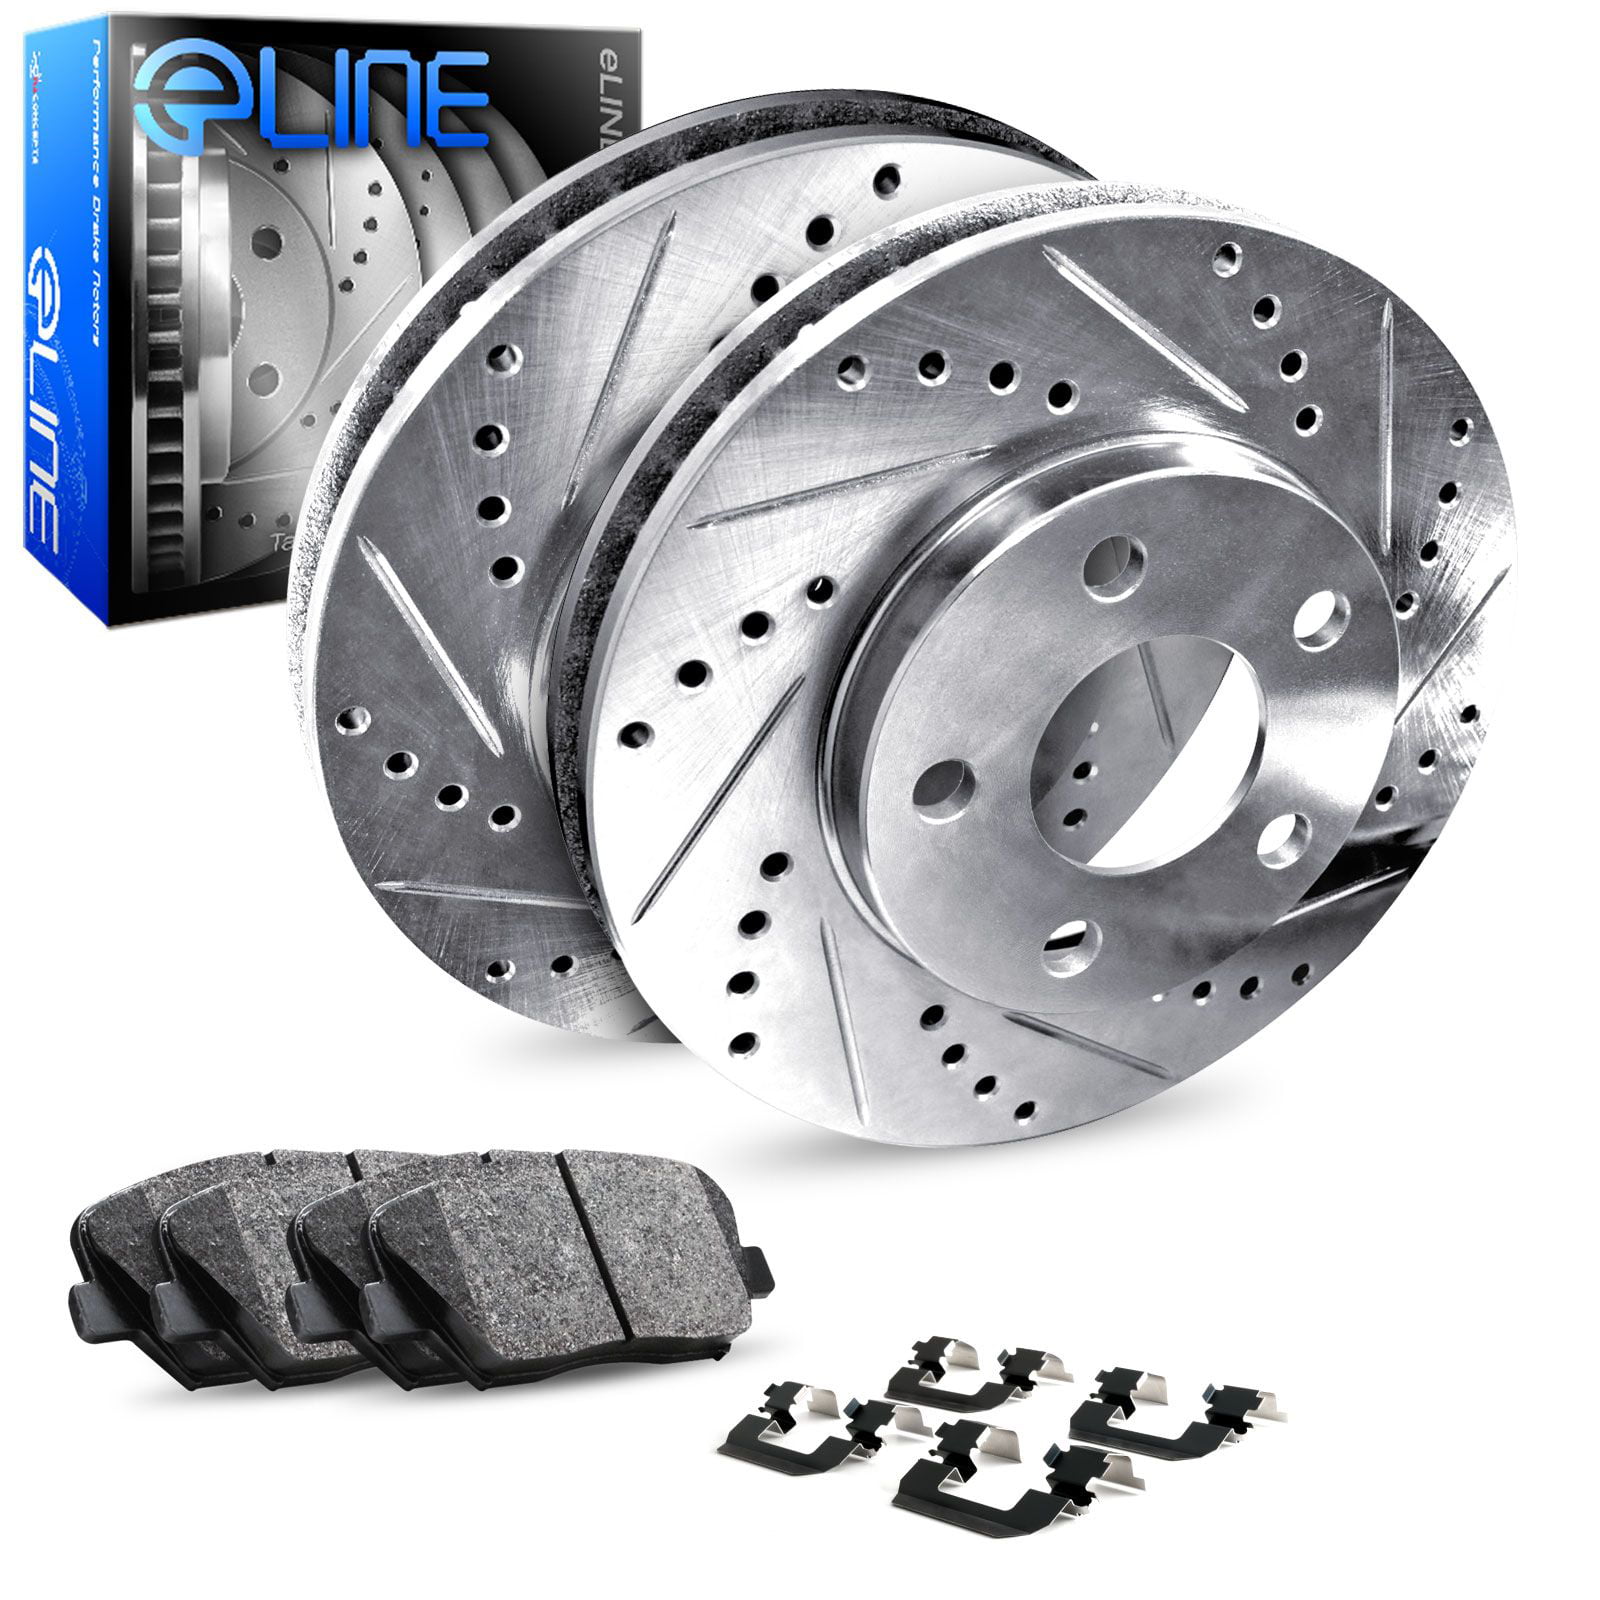 Details about   Font+Rear Drill Slot Brake Rotors And Ceramic Pads For 2008-2014 Cadillac CTS 